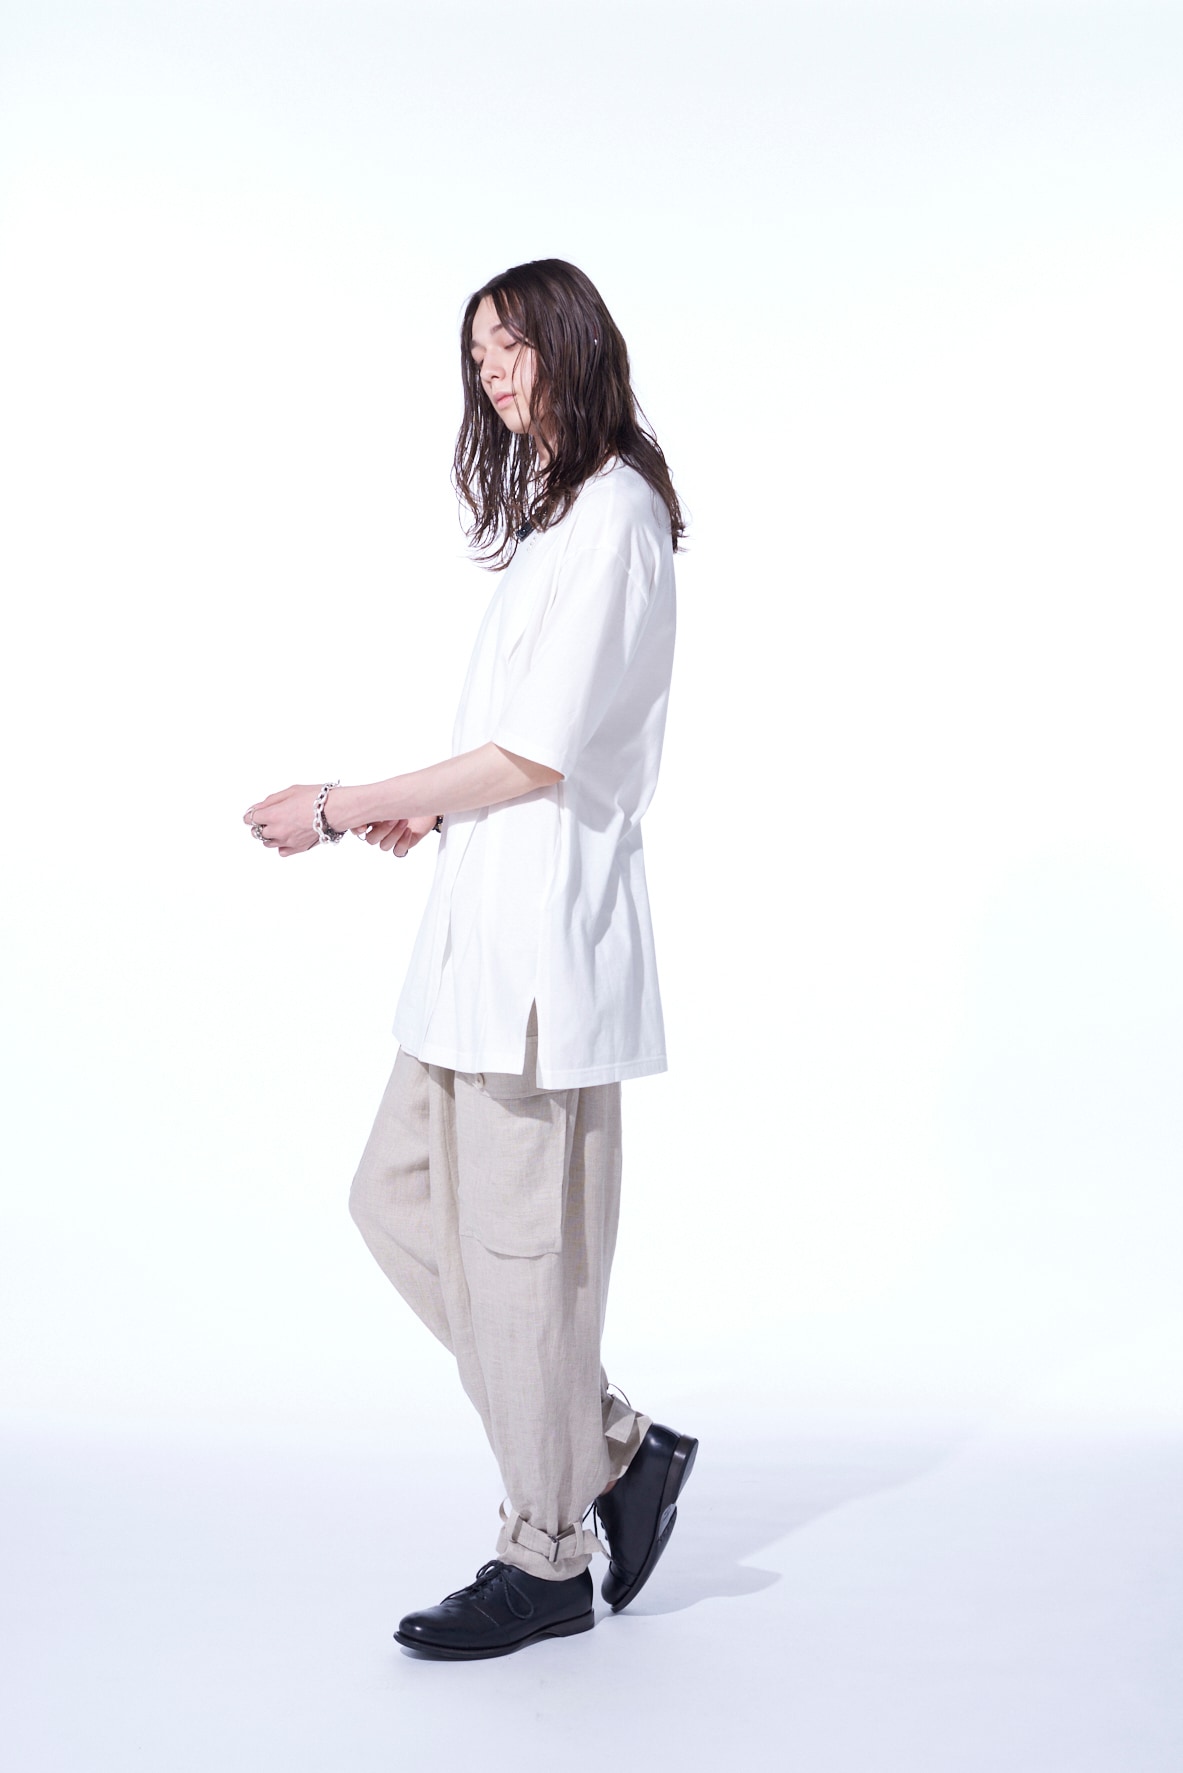 LINEN GAUZE CARGO PANTS WITH BELTED HEMS